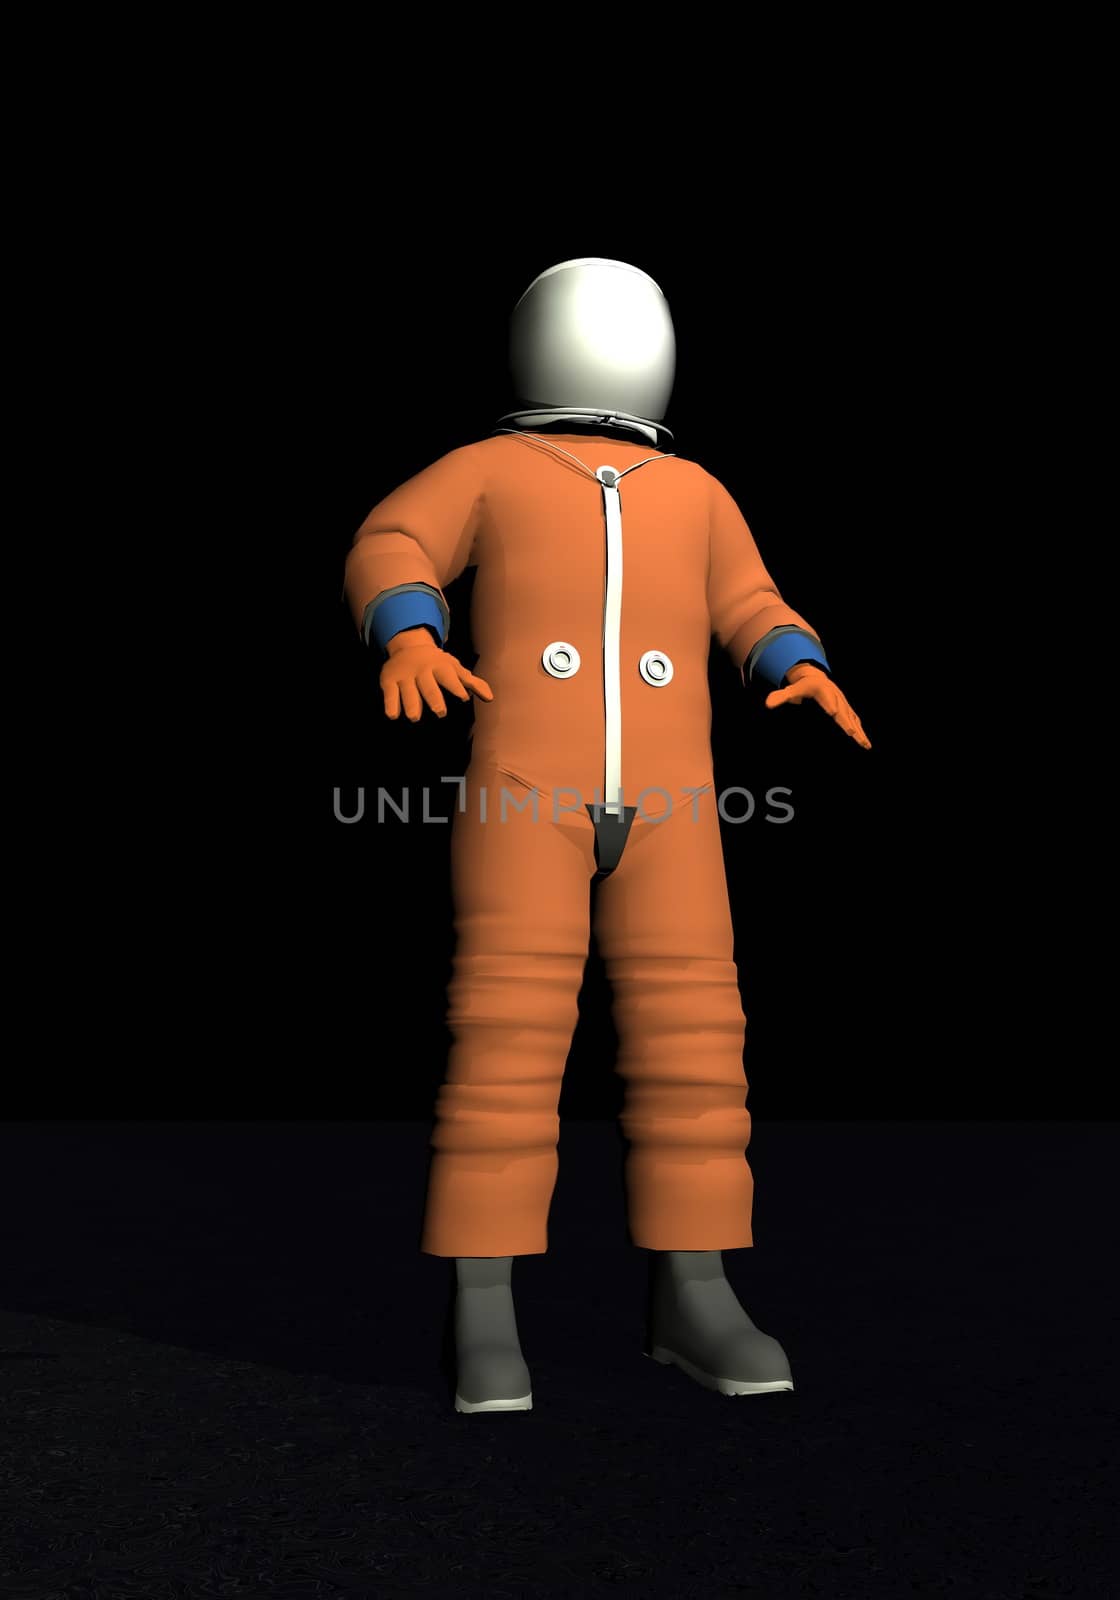 Orange advanced crew escape space suit standing in black background - Elements of this image furnished by NASA